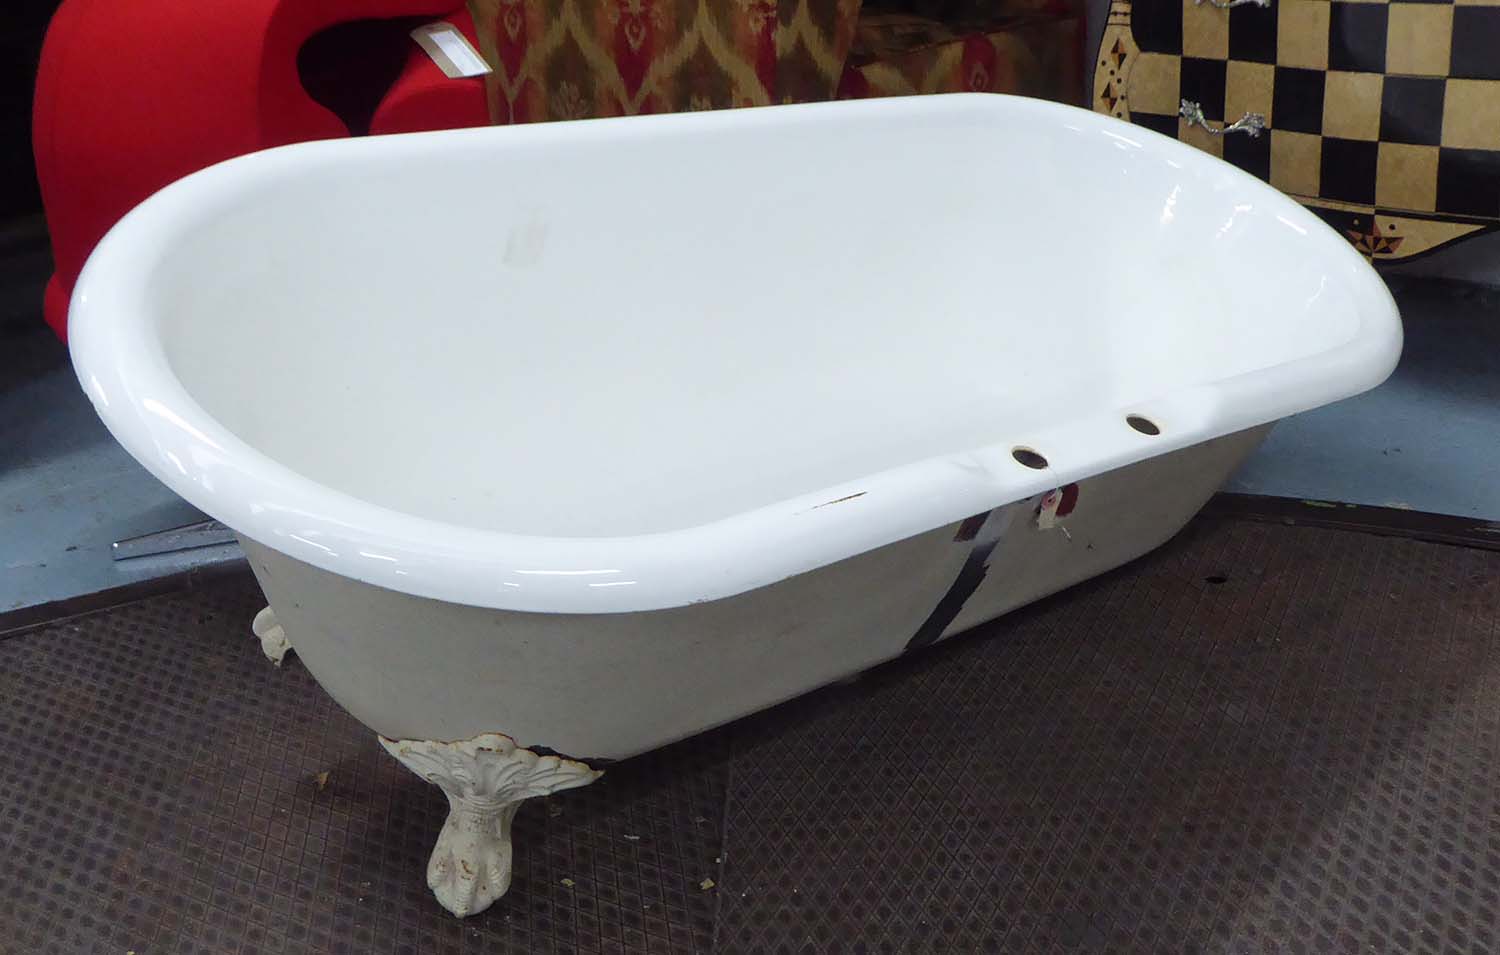 CAST IRON BATH, double ended traditional style on legs, 77cm x 62cm H x 170cm L. - Image 2 of 4